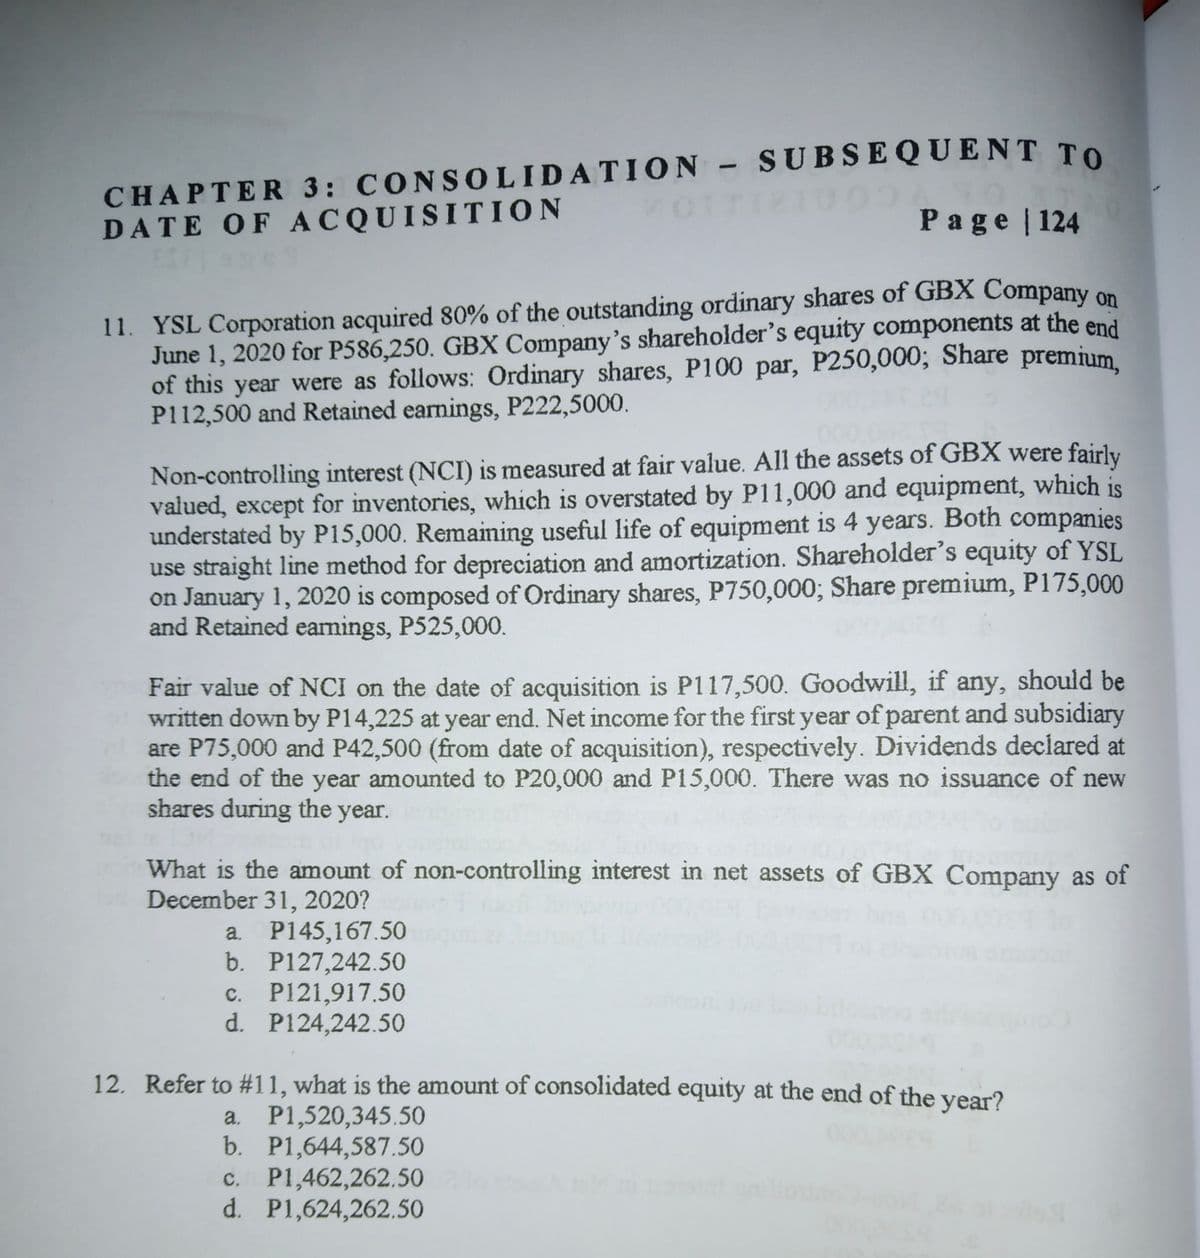 CHAPTER 3: CONSOLIDATION SUBSEQUENT To
DATE OF ACQUISI TION
20TTI2IUO
Page | 124
11. YSL Corporation acquired 80% of the outstanding ordinary shares of GBX Company on
June 1, 2020 for P586,250. GBX Company's shareholder's equity components at the end
of this year were as follows: Ordinary shares, P100 par, P250,000; Share premium.
P112,500 and Retained earnings, P222,5000.
Non-controlling interest (NCI) is measured at fair value. All the assets of GBX were fairly
valued, except for inventories, which is overstated by P11,000 and equipment, which is
understated by P15,000. Remainming useful life of equipment is 4 years. Both companies
use straight line method for depreciation and amortization. Shareholder's equity of YSL
on January 1, 2020 is composed of Ordinary shares, P750,000; Share premium, P175,000
and Retained earnings, P525,000.
Fair value of NCI on the date of acquisition is P117,500. Goodwill, if any, should be
written down by P14,225 at year end. Net income for the first year of parent and subsidiary
are P75,000 and P42,500 (from date of acquisition), respectively. Dividends declared at
the end of the year amounted to P20,000 and P15,000. There was no issuance of new
shares during the year.
What is the amount of non-controlling interest in net assets of GBX Company as of
December 31, 2020?
a. P145,167.50O
b. P127,242.50
c. P121,917.50
d. P124,242.50
12. Refer to #11, what is the amount of consolidated equity at the end of the year?
a. P1,520,345.50
b. P1,644,587.50
c. P1,462,262.50
d. P1,624,262.50
